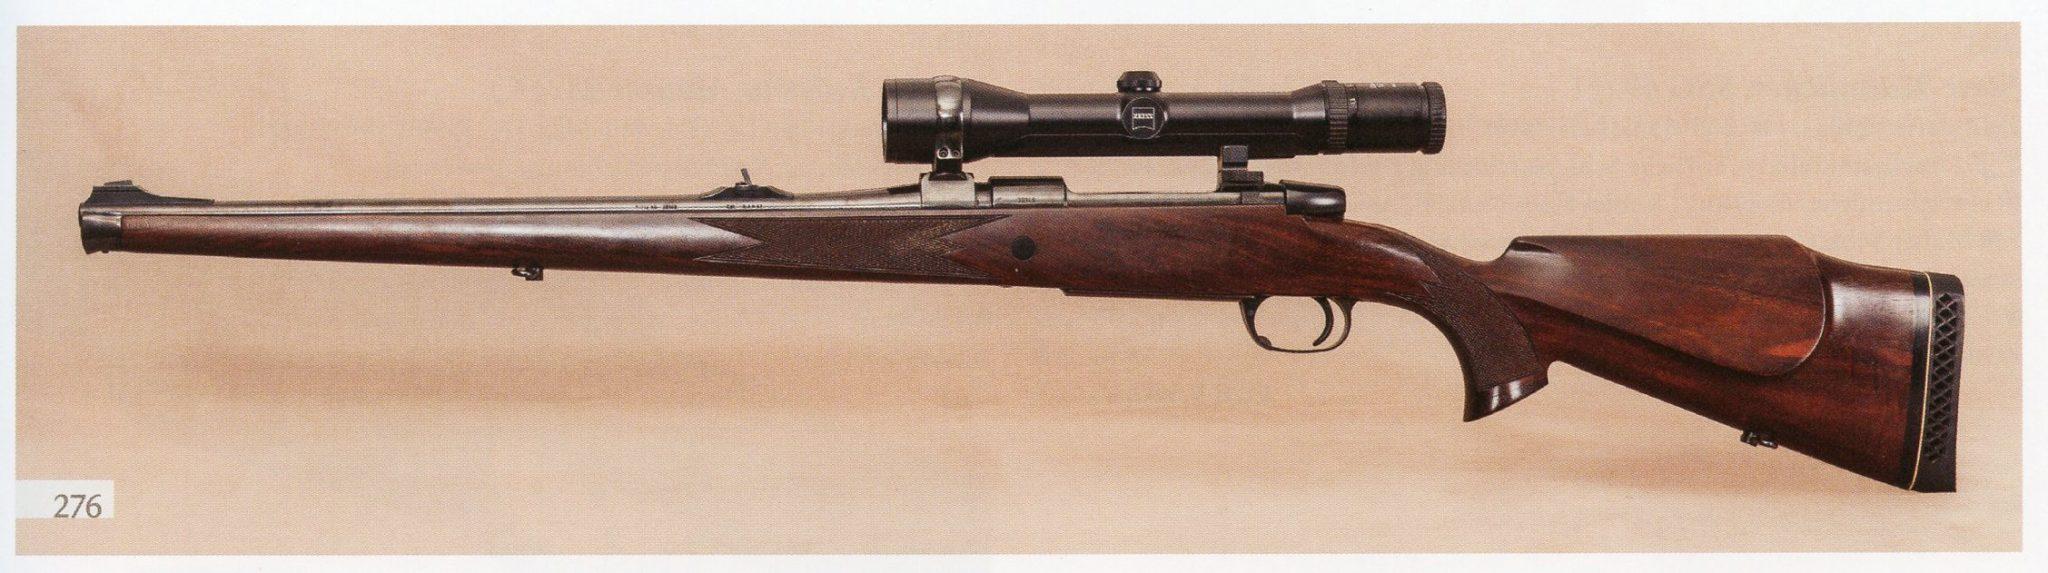 Heym SR-20 sporting and hunting rifle with mounted scope